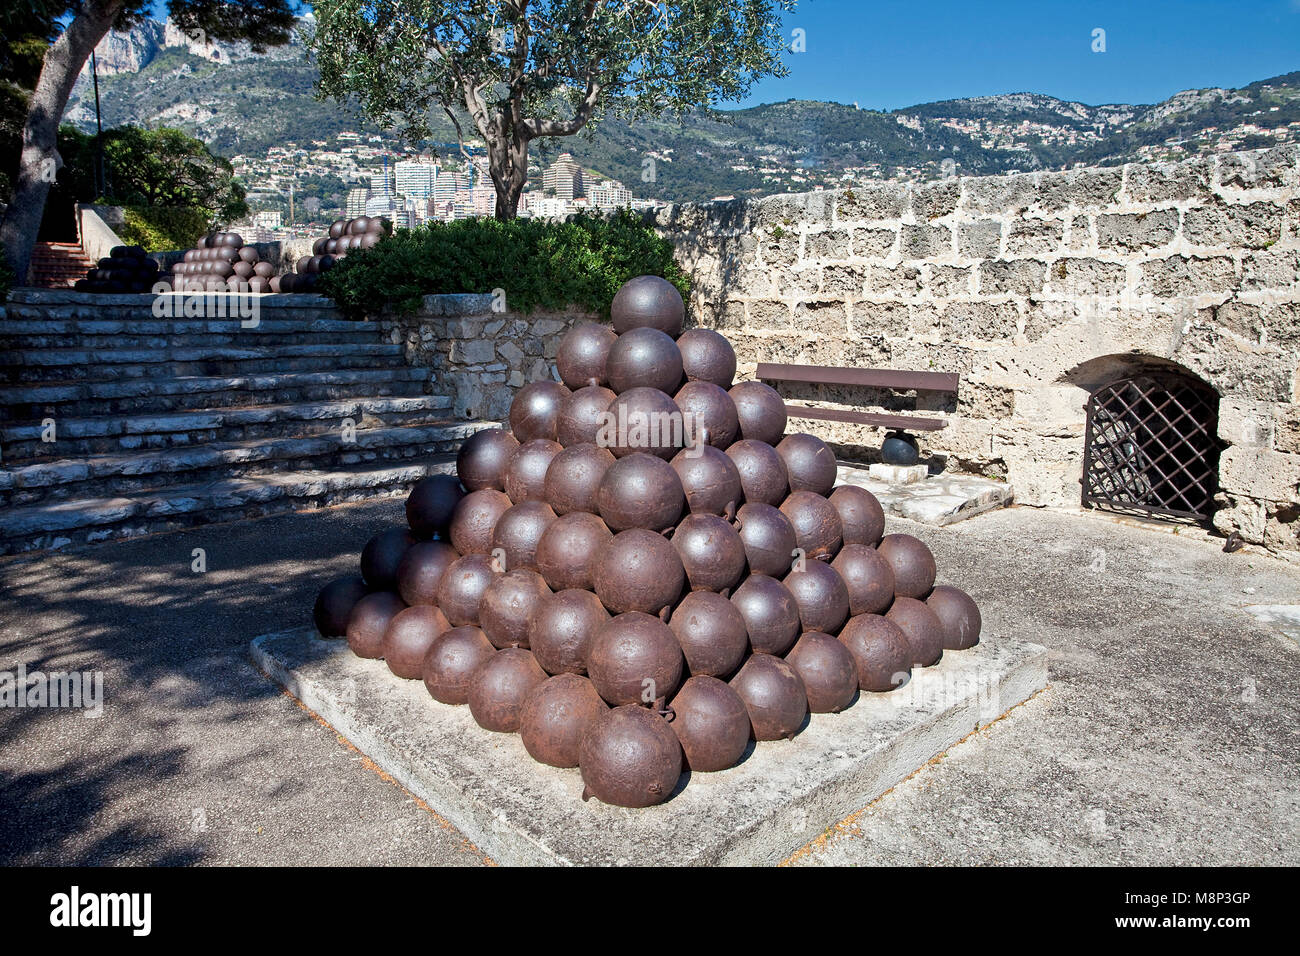 Stacked cannon balls at Palais Princier, Princes Palace of Monaco, official residence of the Sovereign Prince of Monaco, Côte d'Azur, french riviera Stock Photo